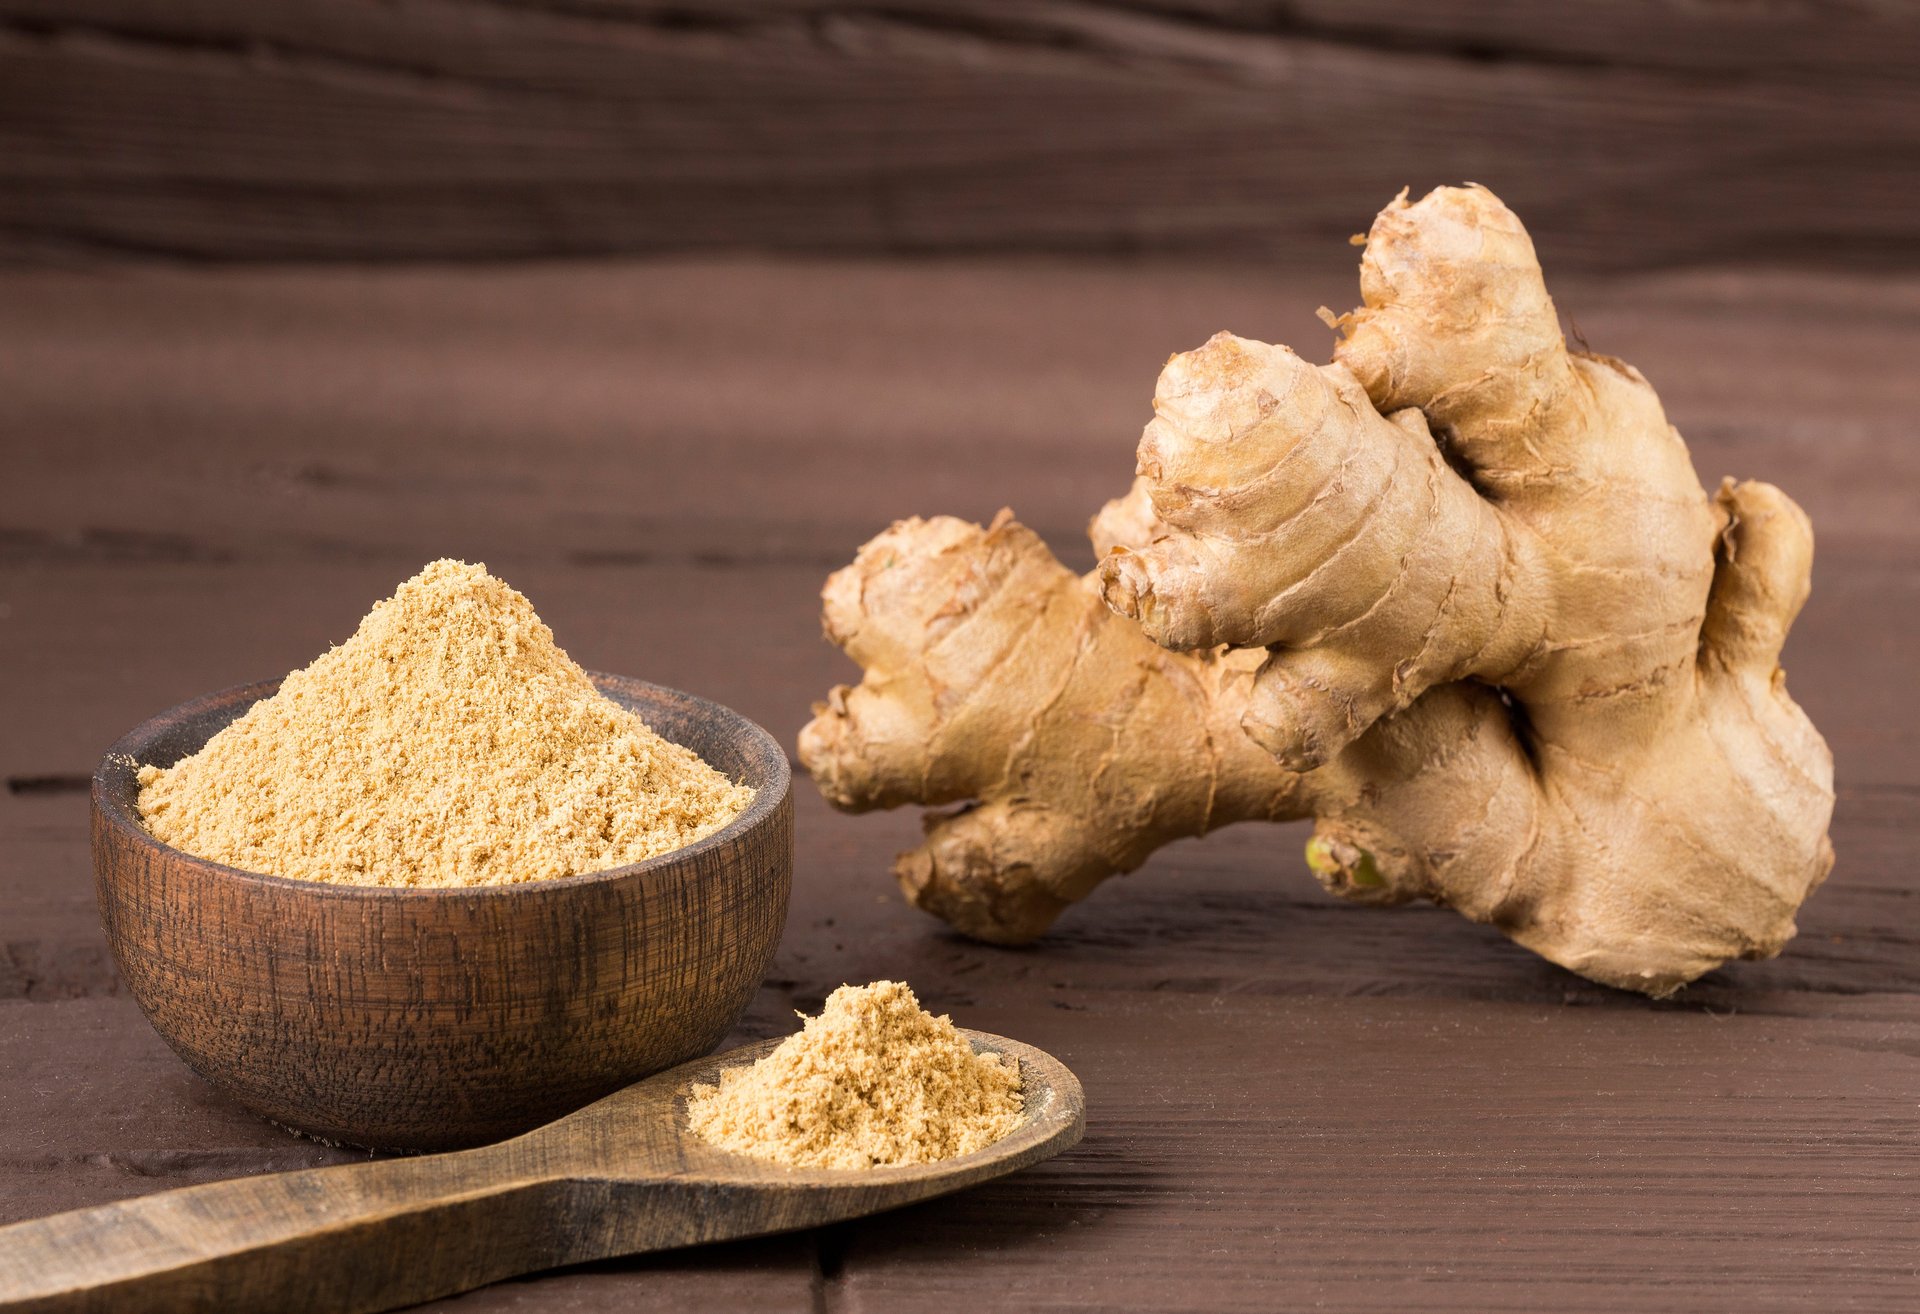 News Picture: Ginger May Ease Inflammation of Autoimmune Diseases